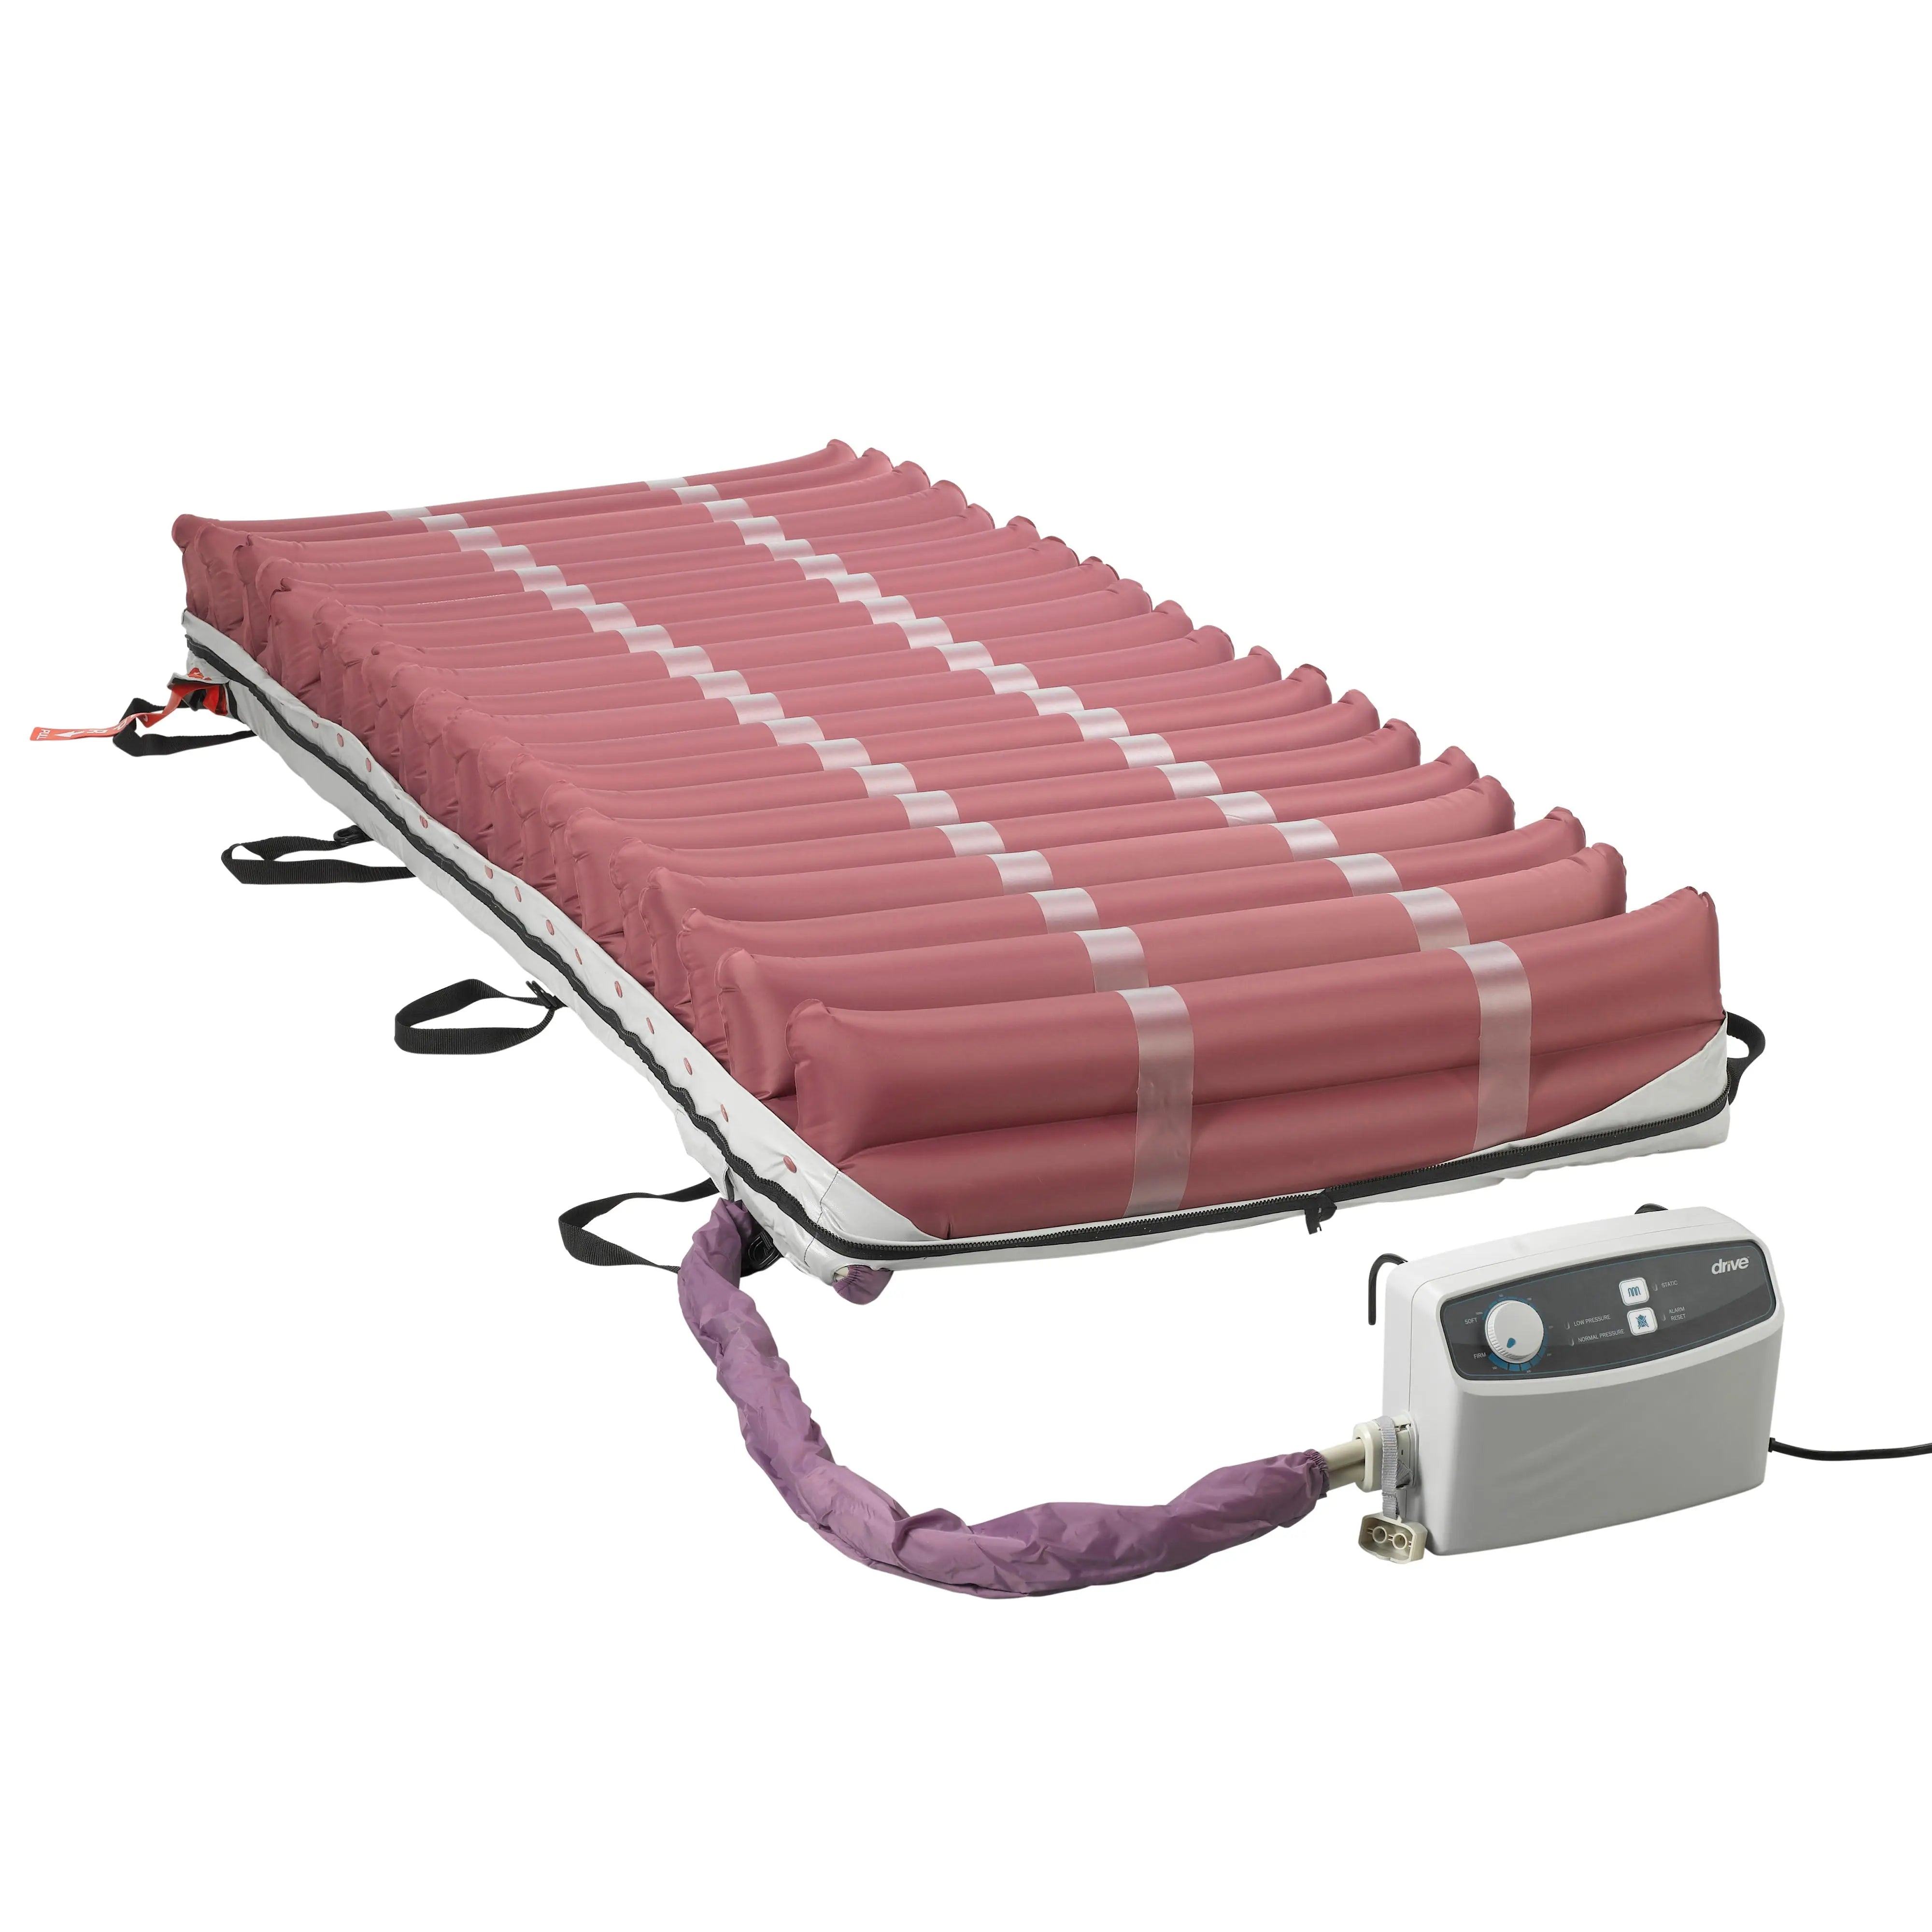 Med Aire Low Air Loss Mattress Replacement System with Alternating Pressure - Home Health Store Inc